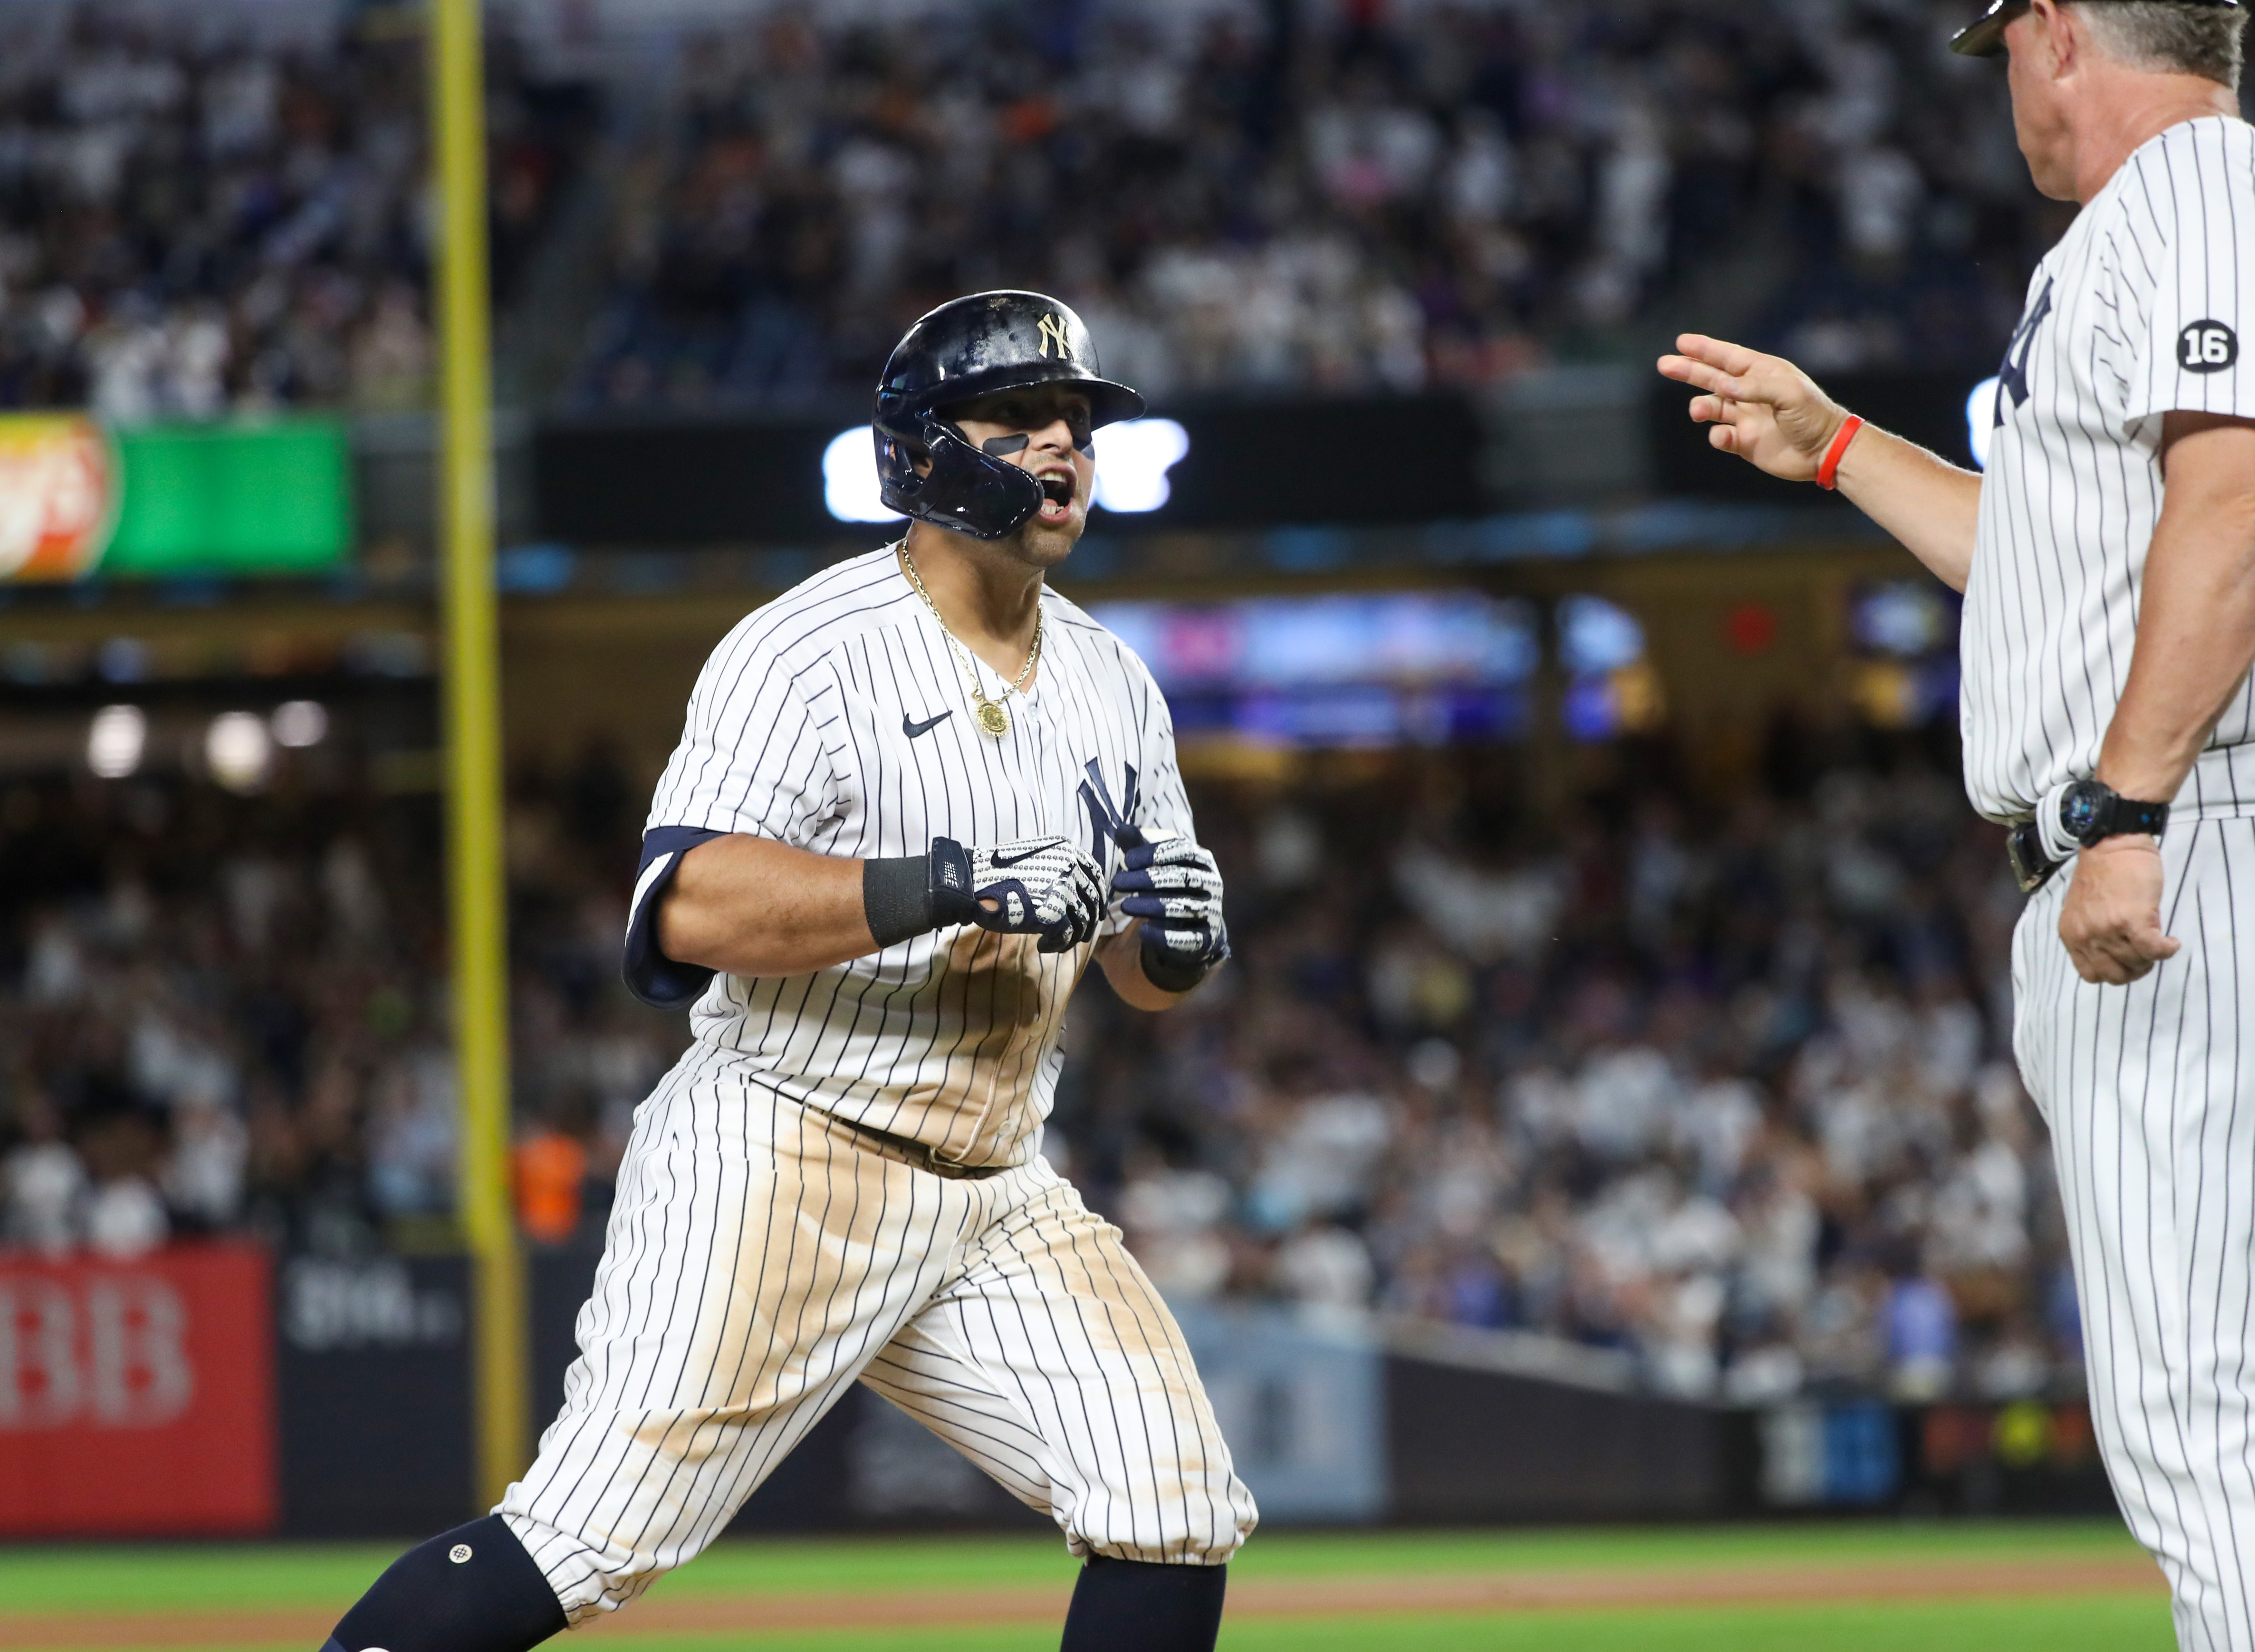 Field of Dreams Game 2021 Yankees-White Sox live stream (8/12) How